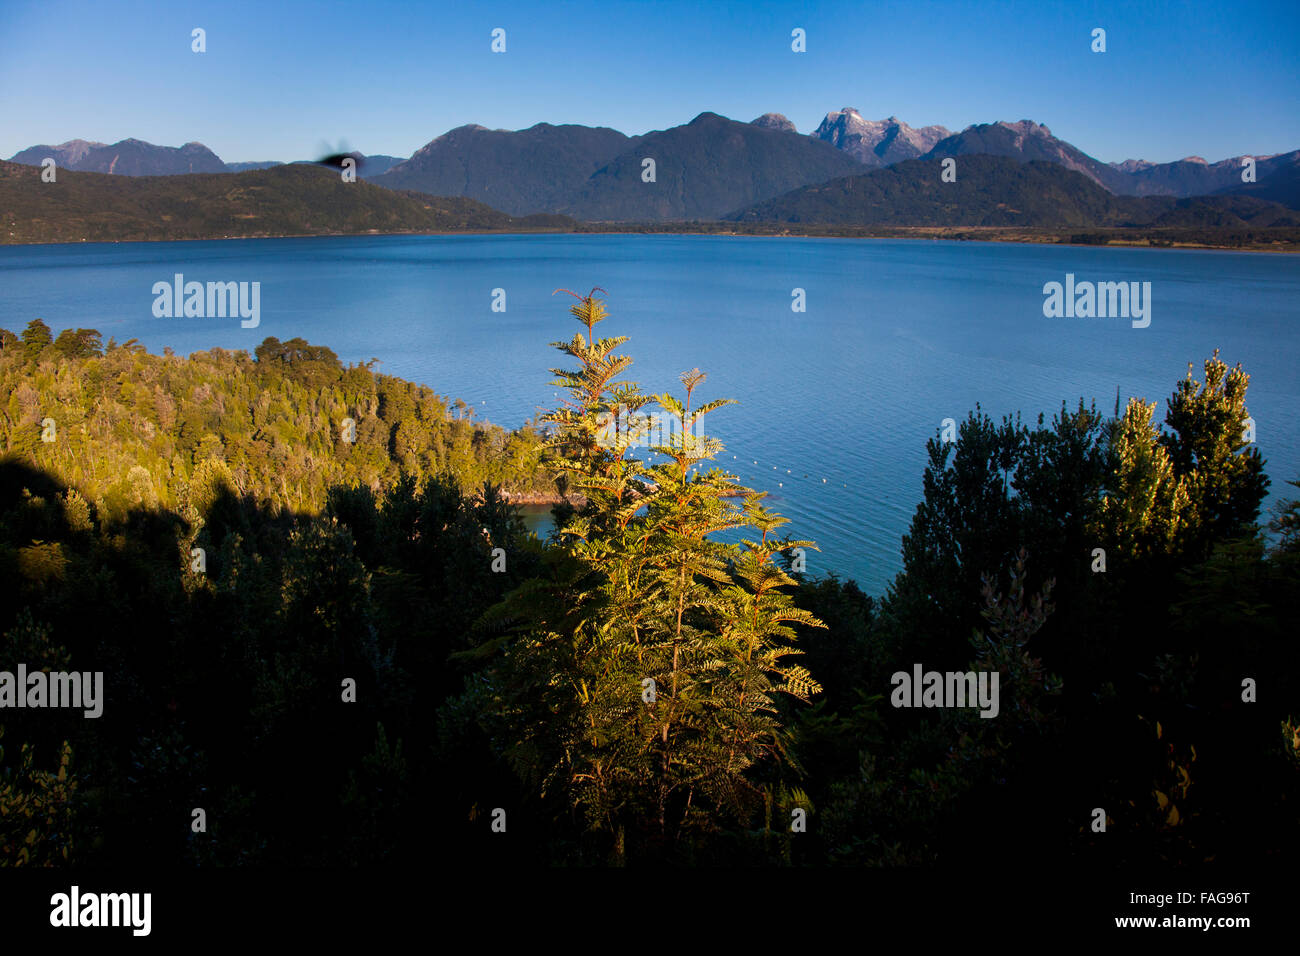 The mountainous and heavily forested Reloncaví Sound in Chile's northern Patagonia. Stock Photo